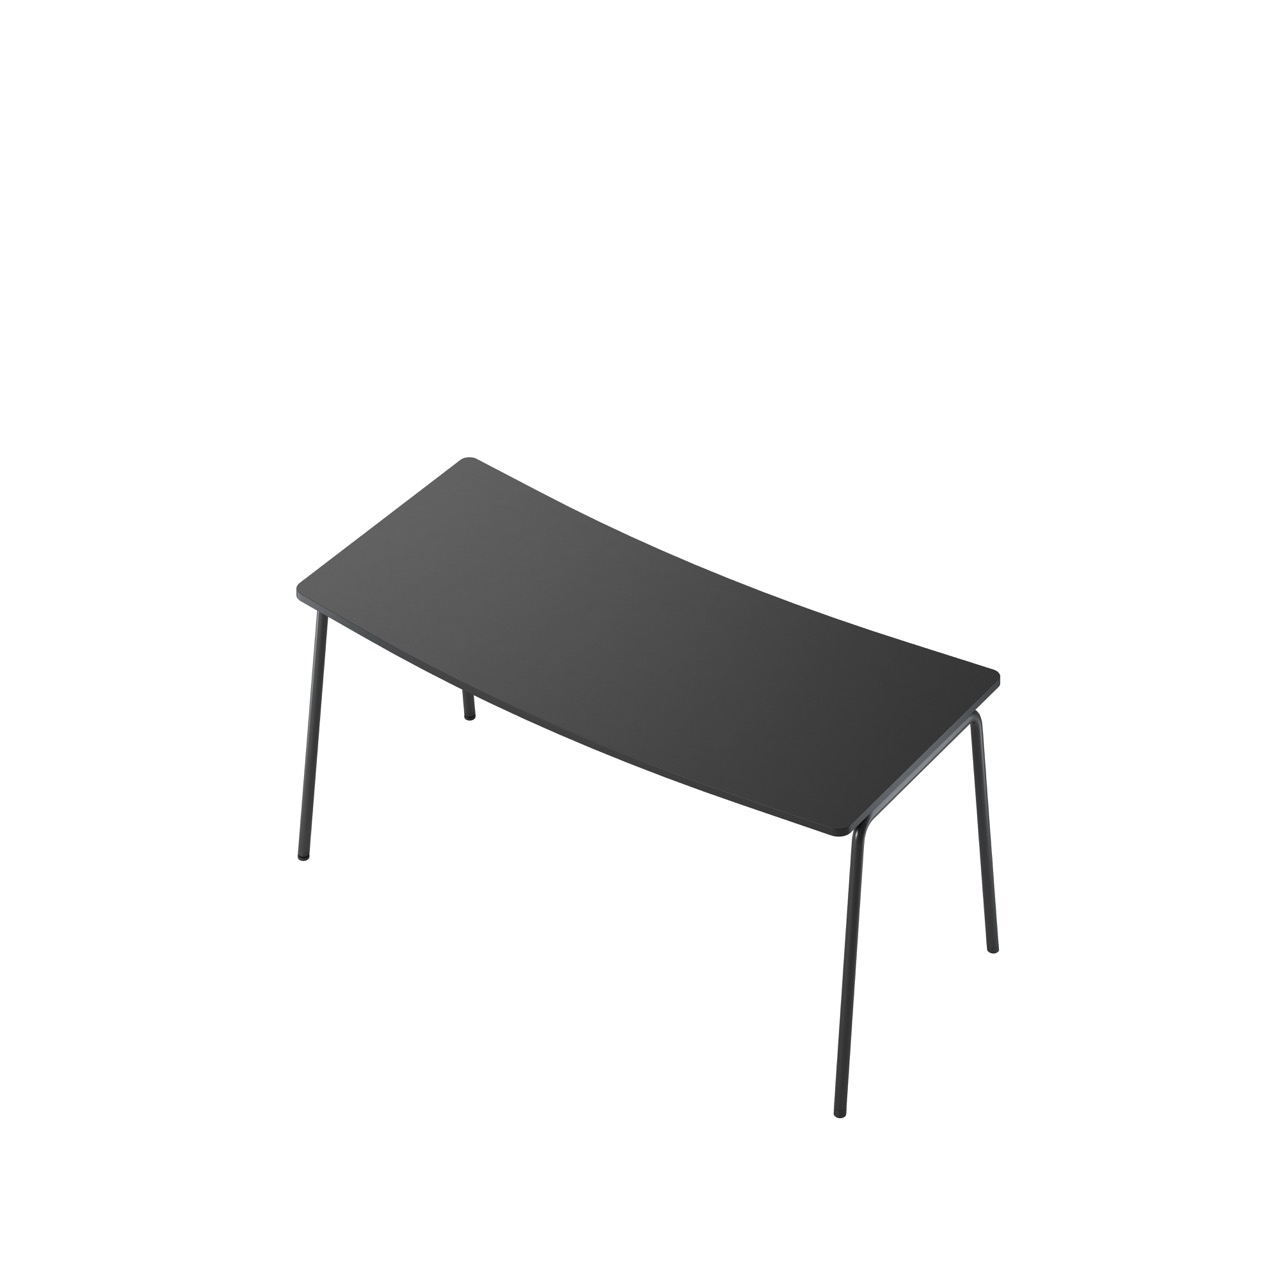 OCEE&FOUR - Tables - FourReal 74 - 180 x 80 - Angled - Packshot Image 3(1) Large